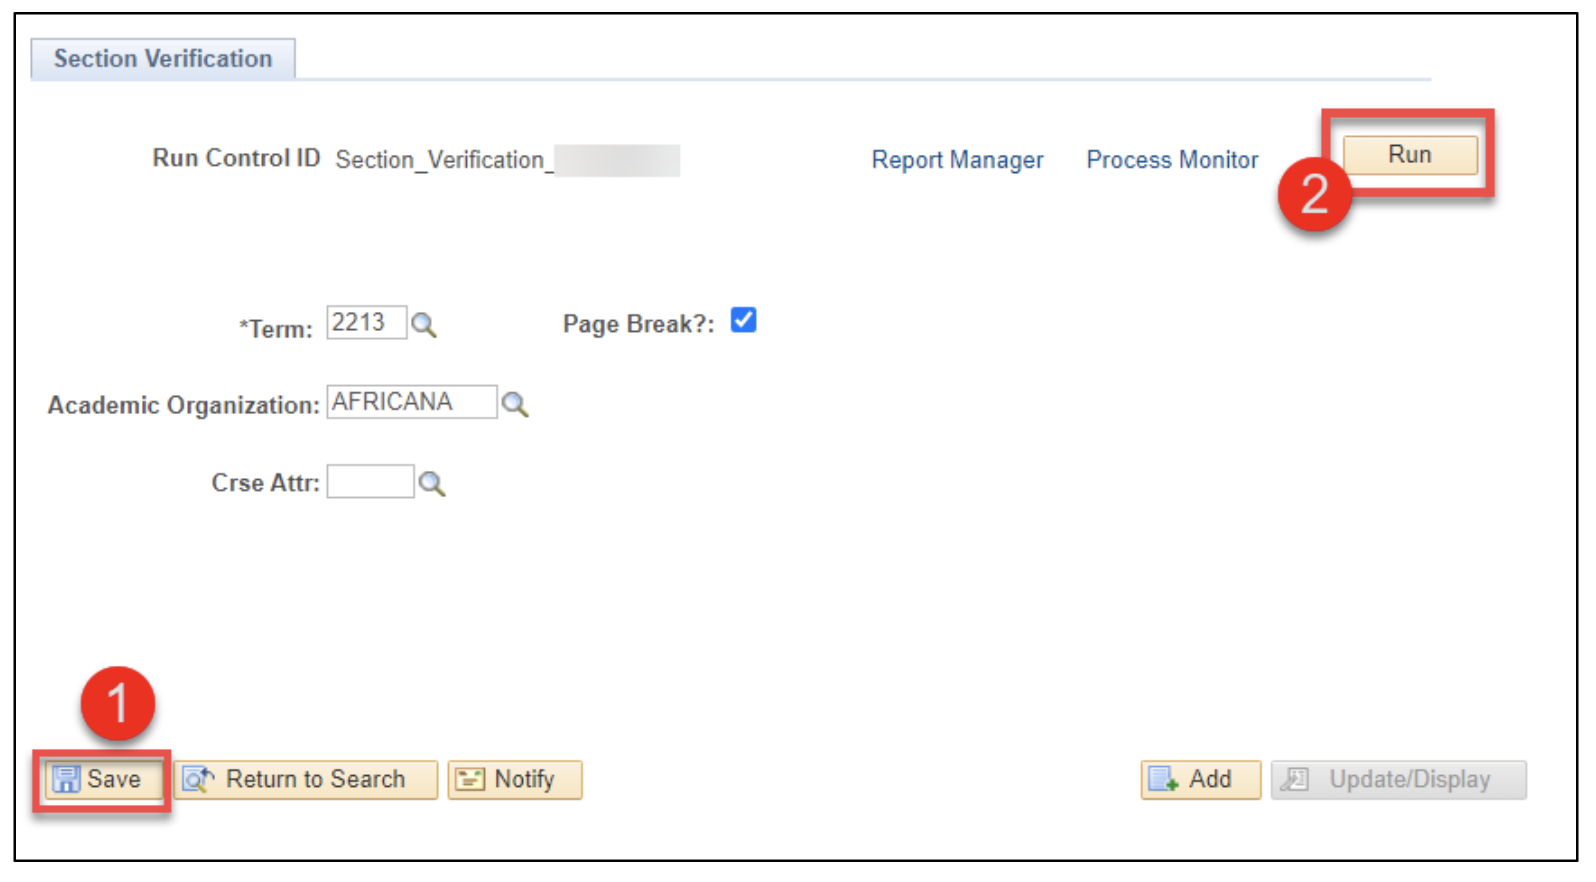 A screenshot of the PeopleSoft page, showing how to save and run an SVL query, as described above.